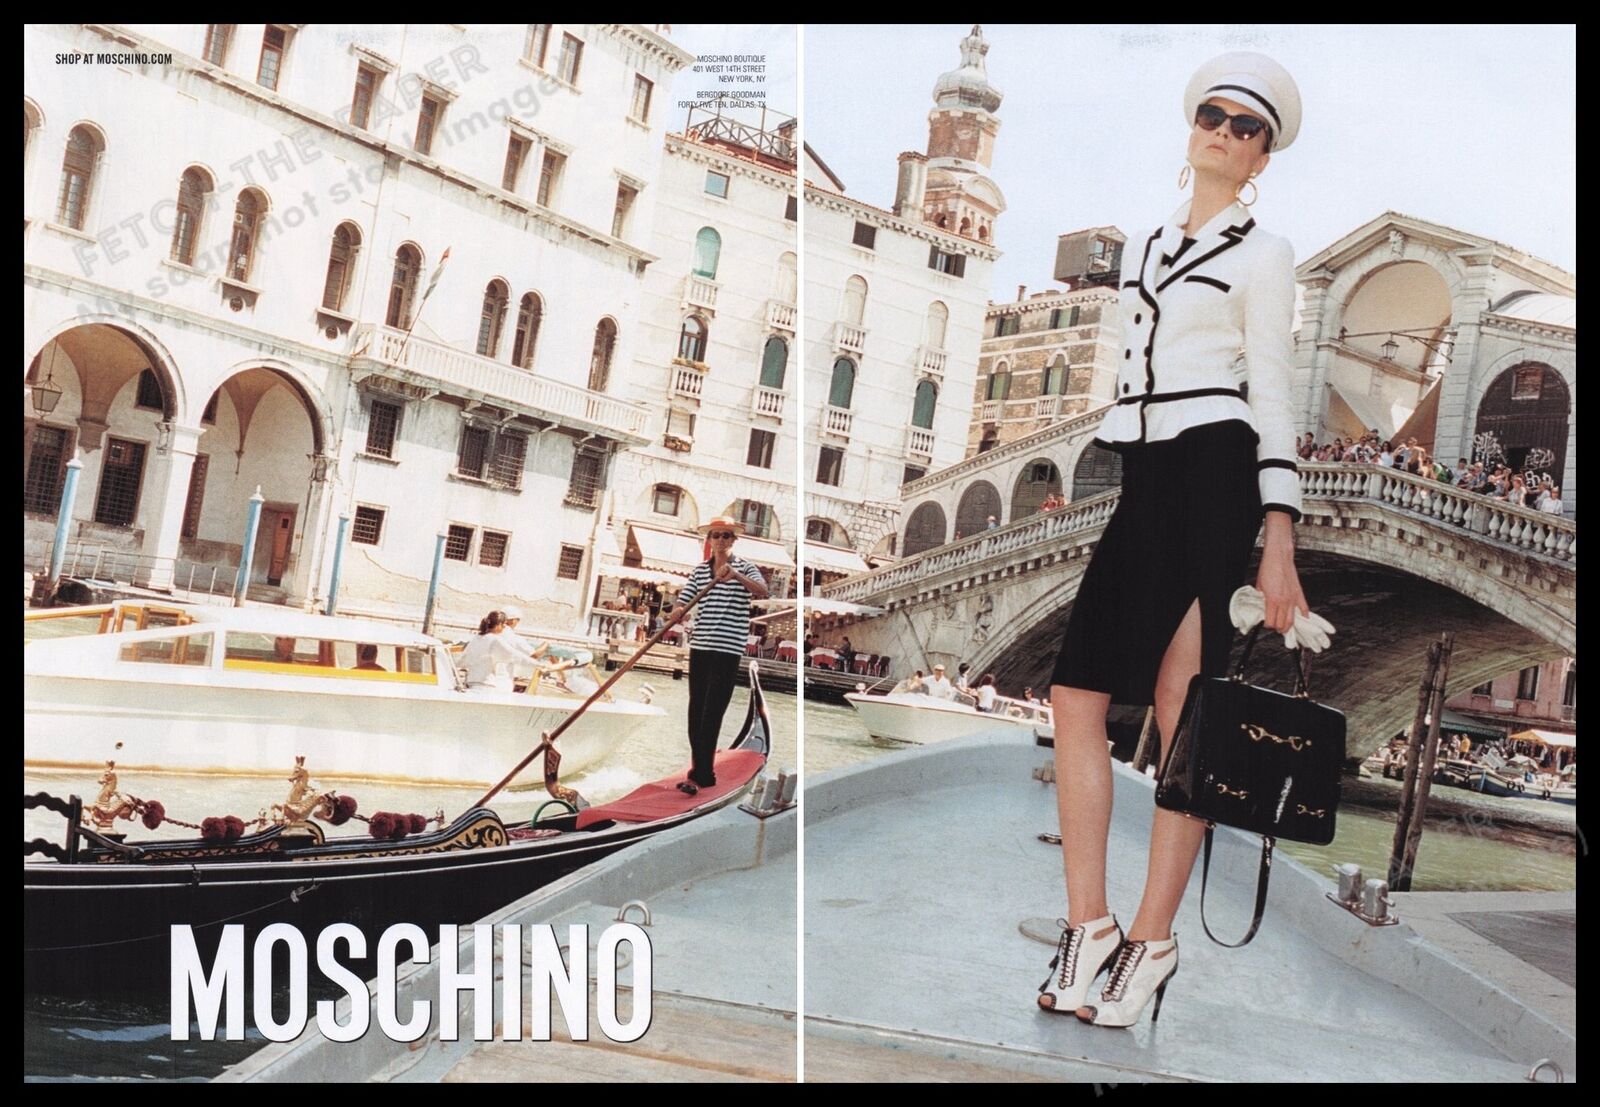 Moschino Fashion 2000s Print Advertisement (2 pages) 2011 Legs Venice Italy